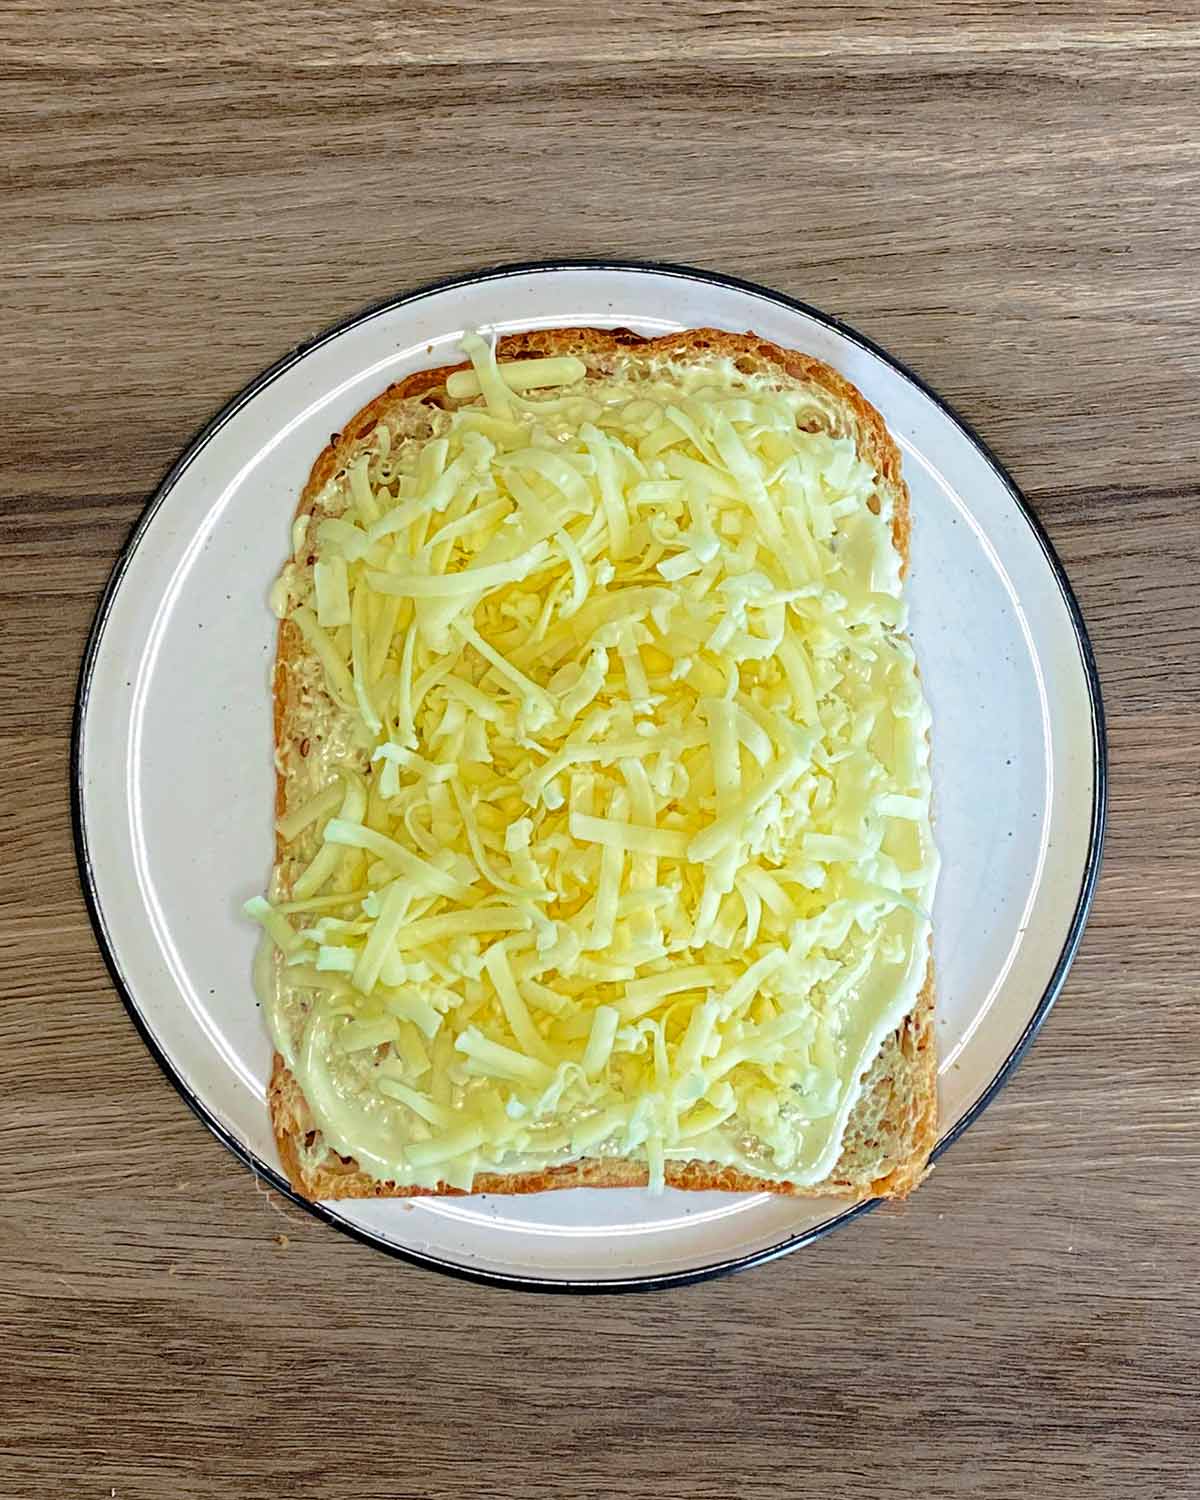 Grated cheese added to the bread.